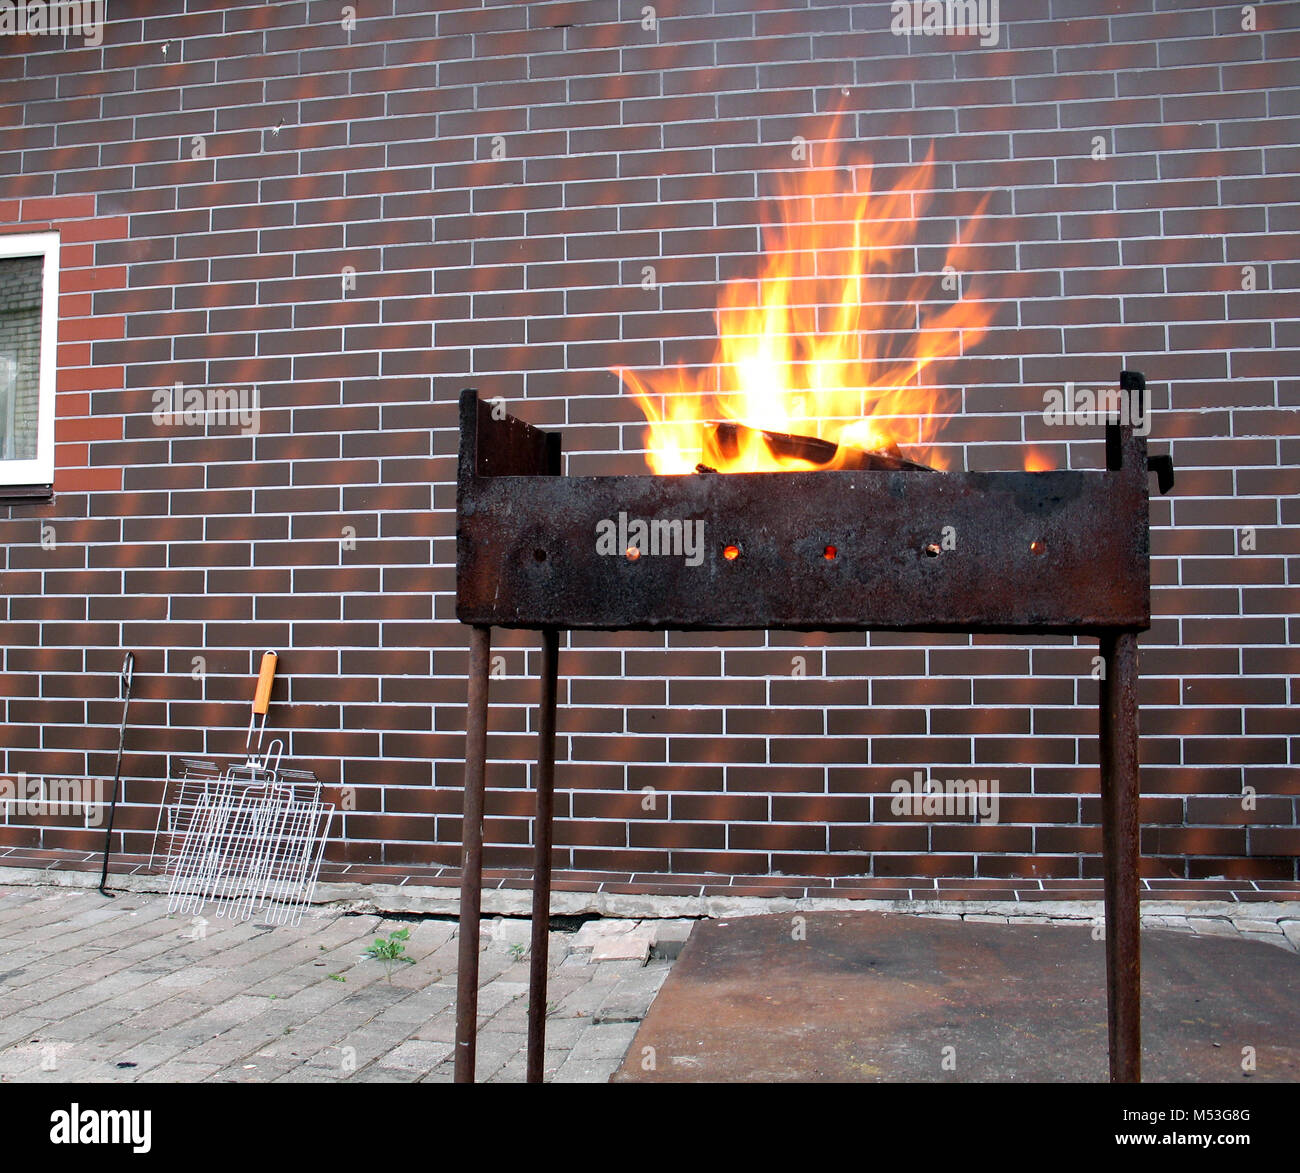 Firewood and fire in the old rusty charcoal grill on brick wall background Stock Photo